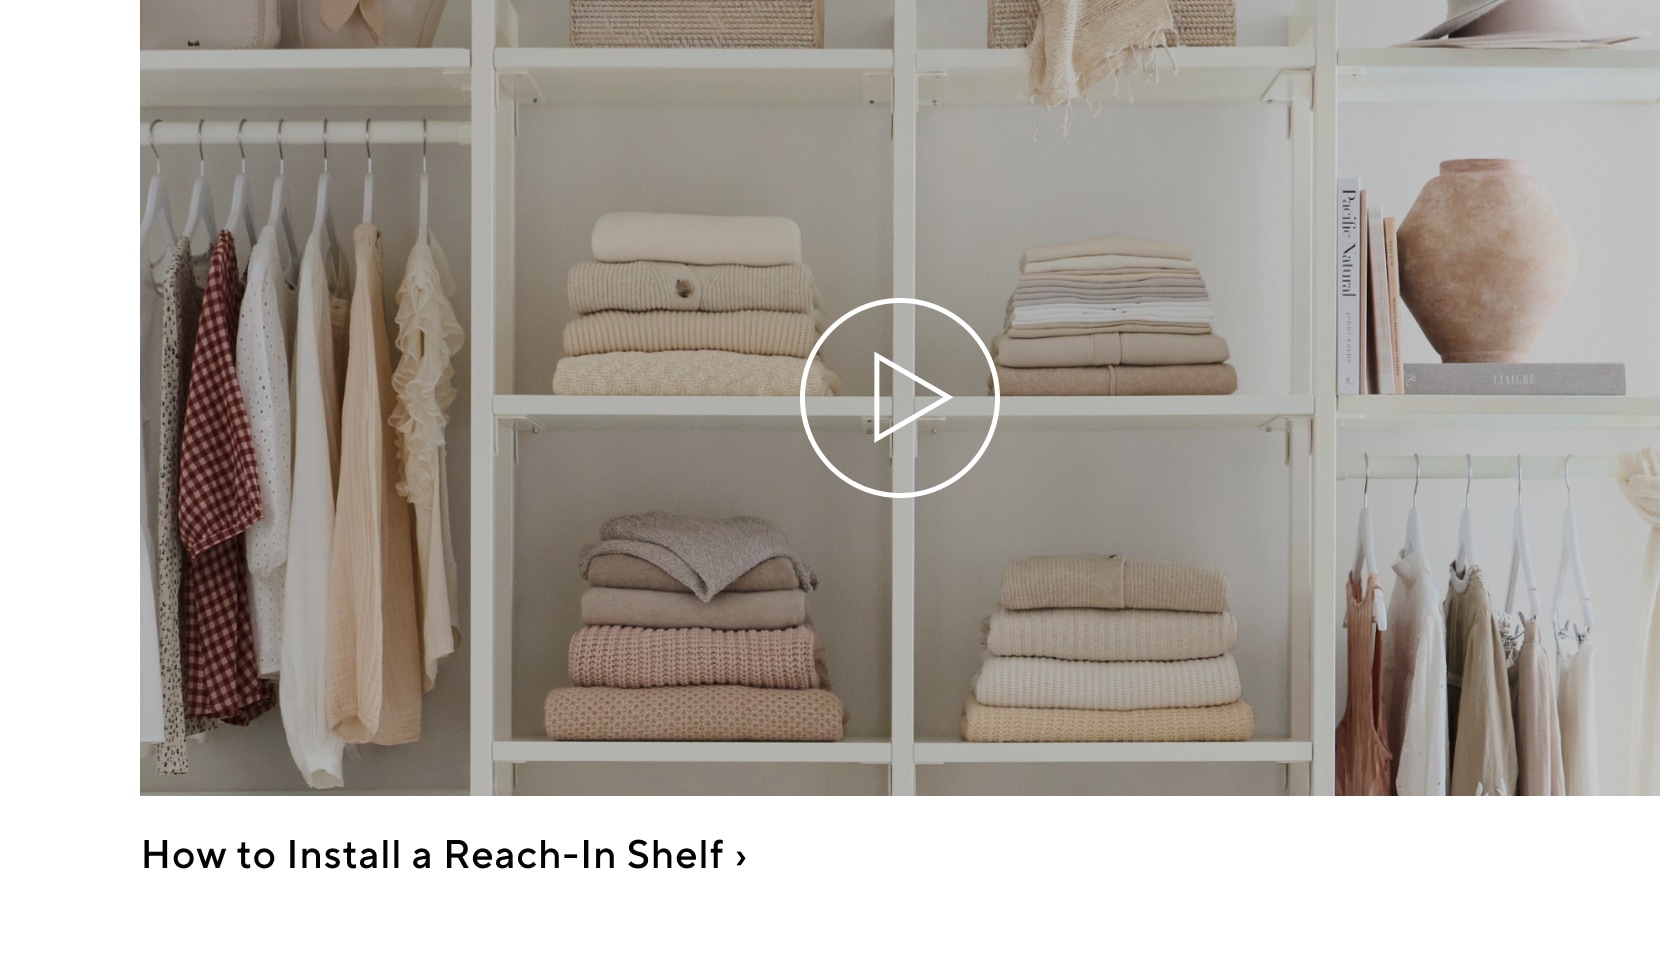 How to Install a Reach-In Shelf